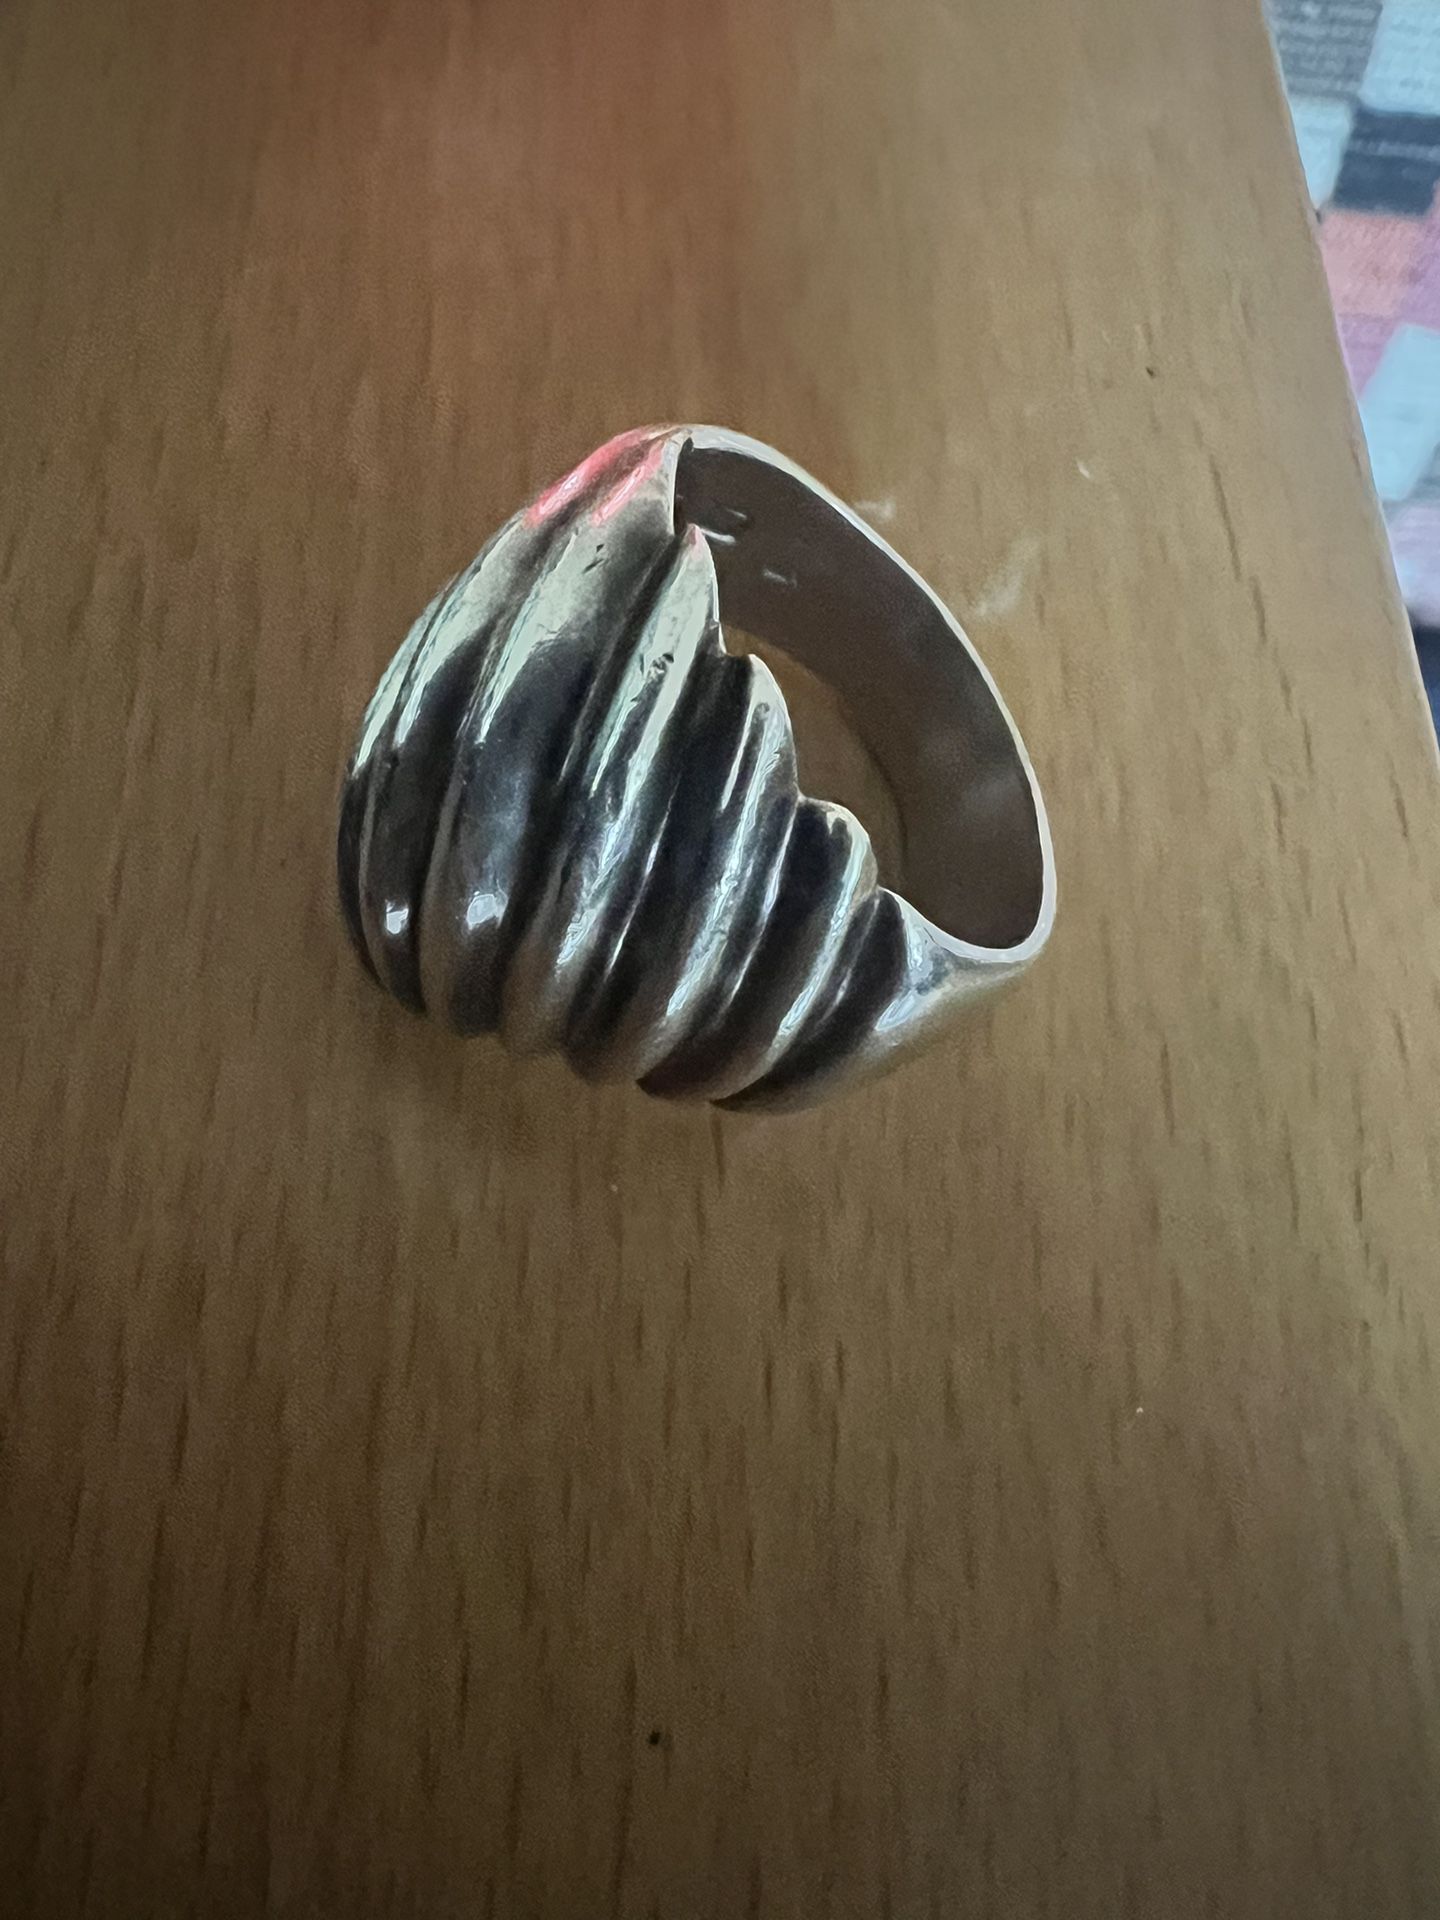 Sea Shell 925 Solid Silver Ring.